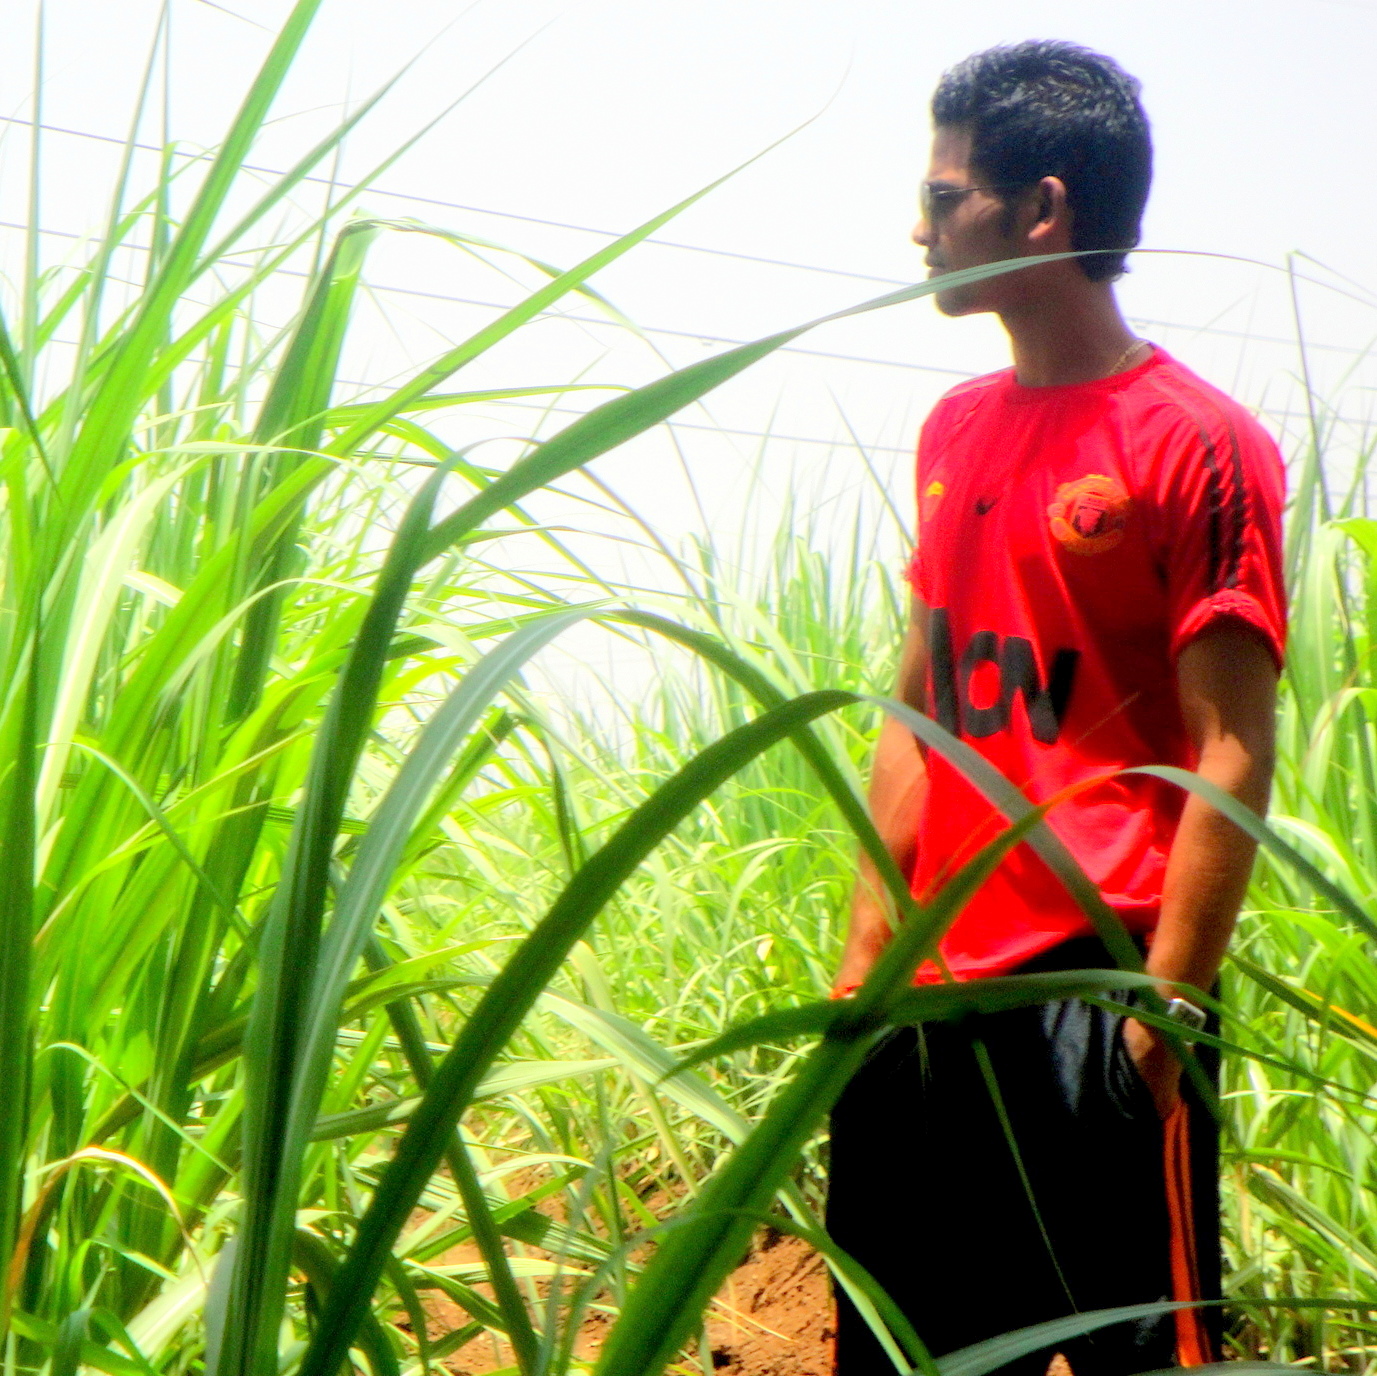 a young man standing among tall grass on the side of the road